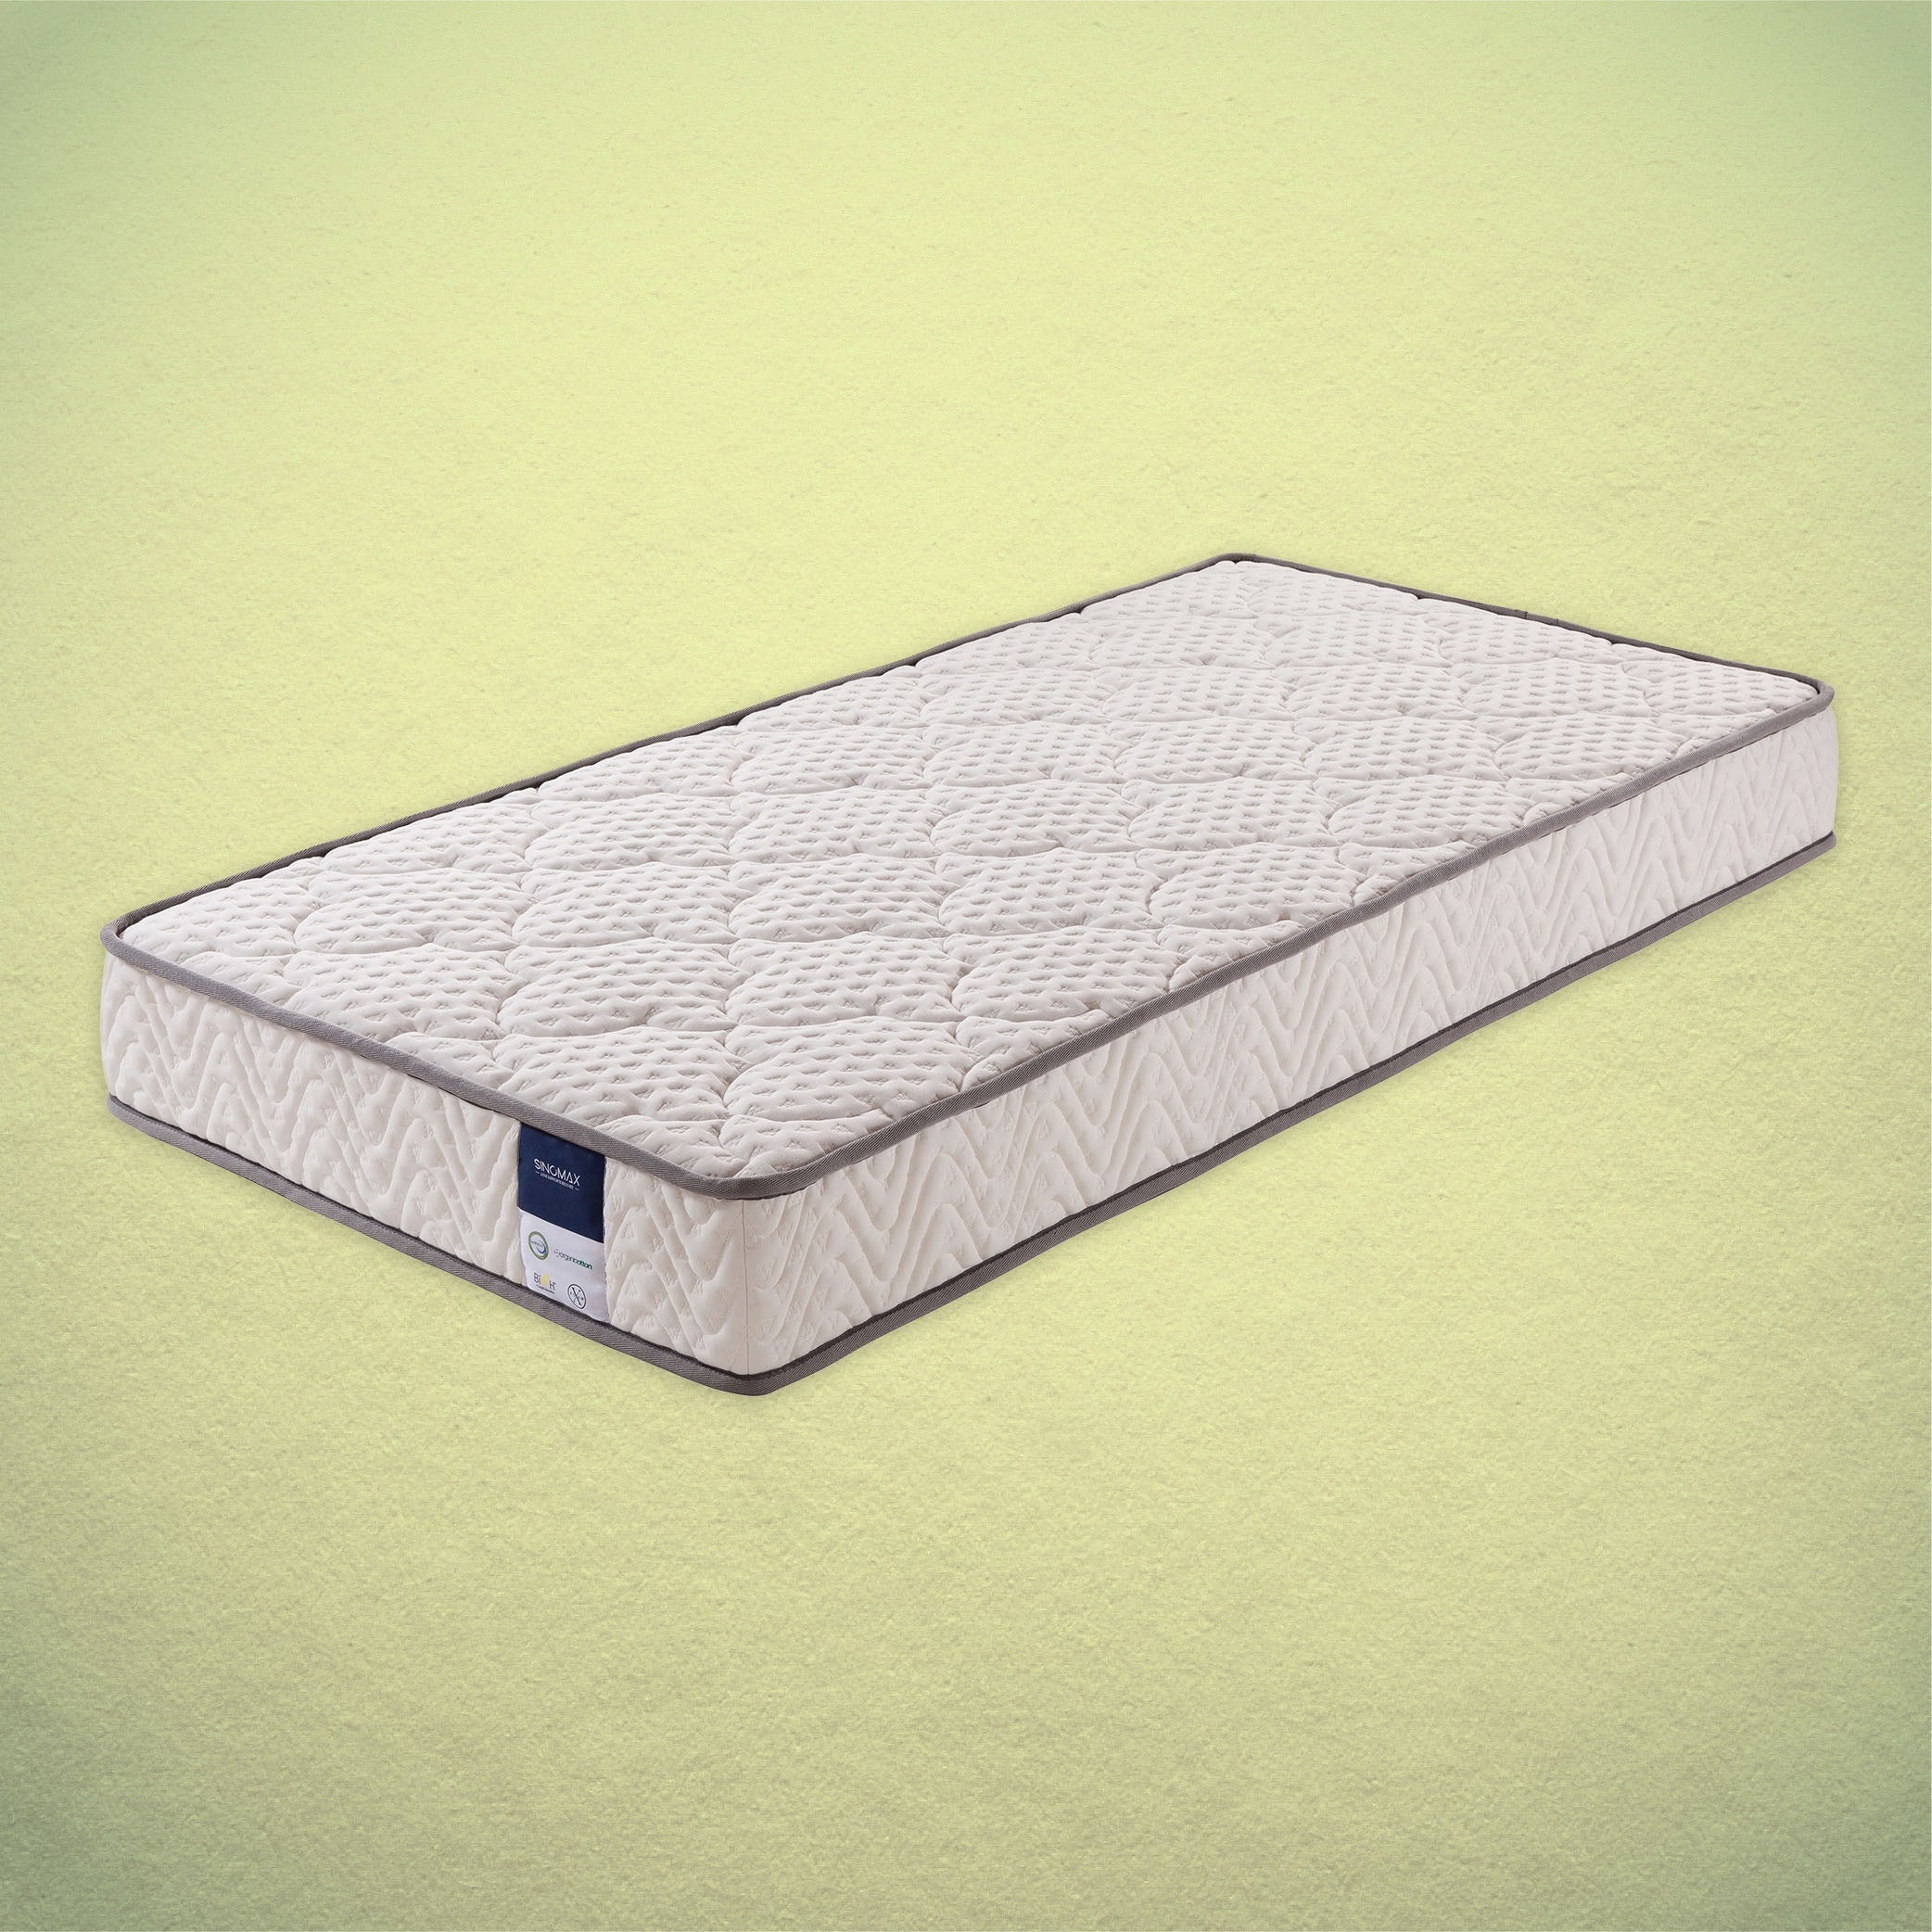 Comfy Seasonal Mattress - Tailor-made size (Above 48" W)